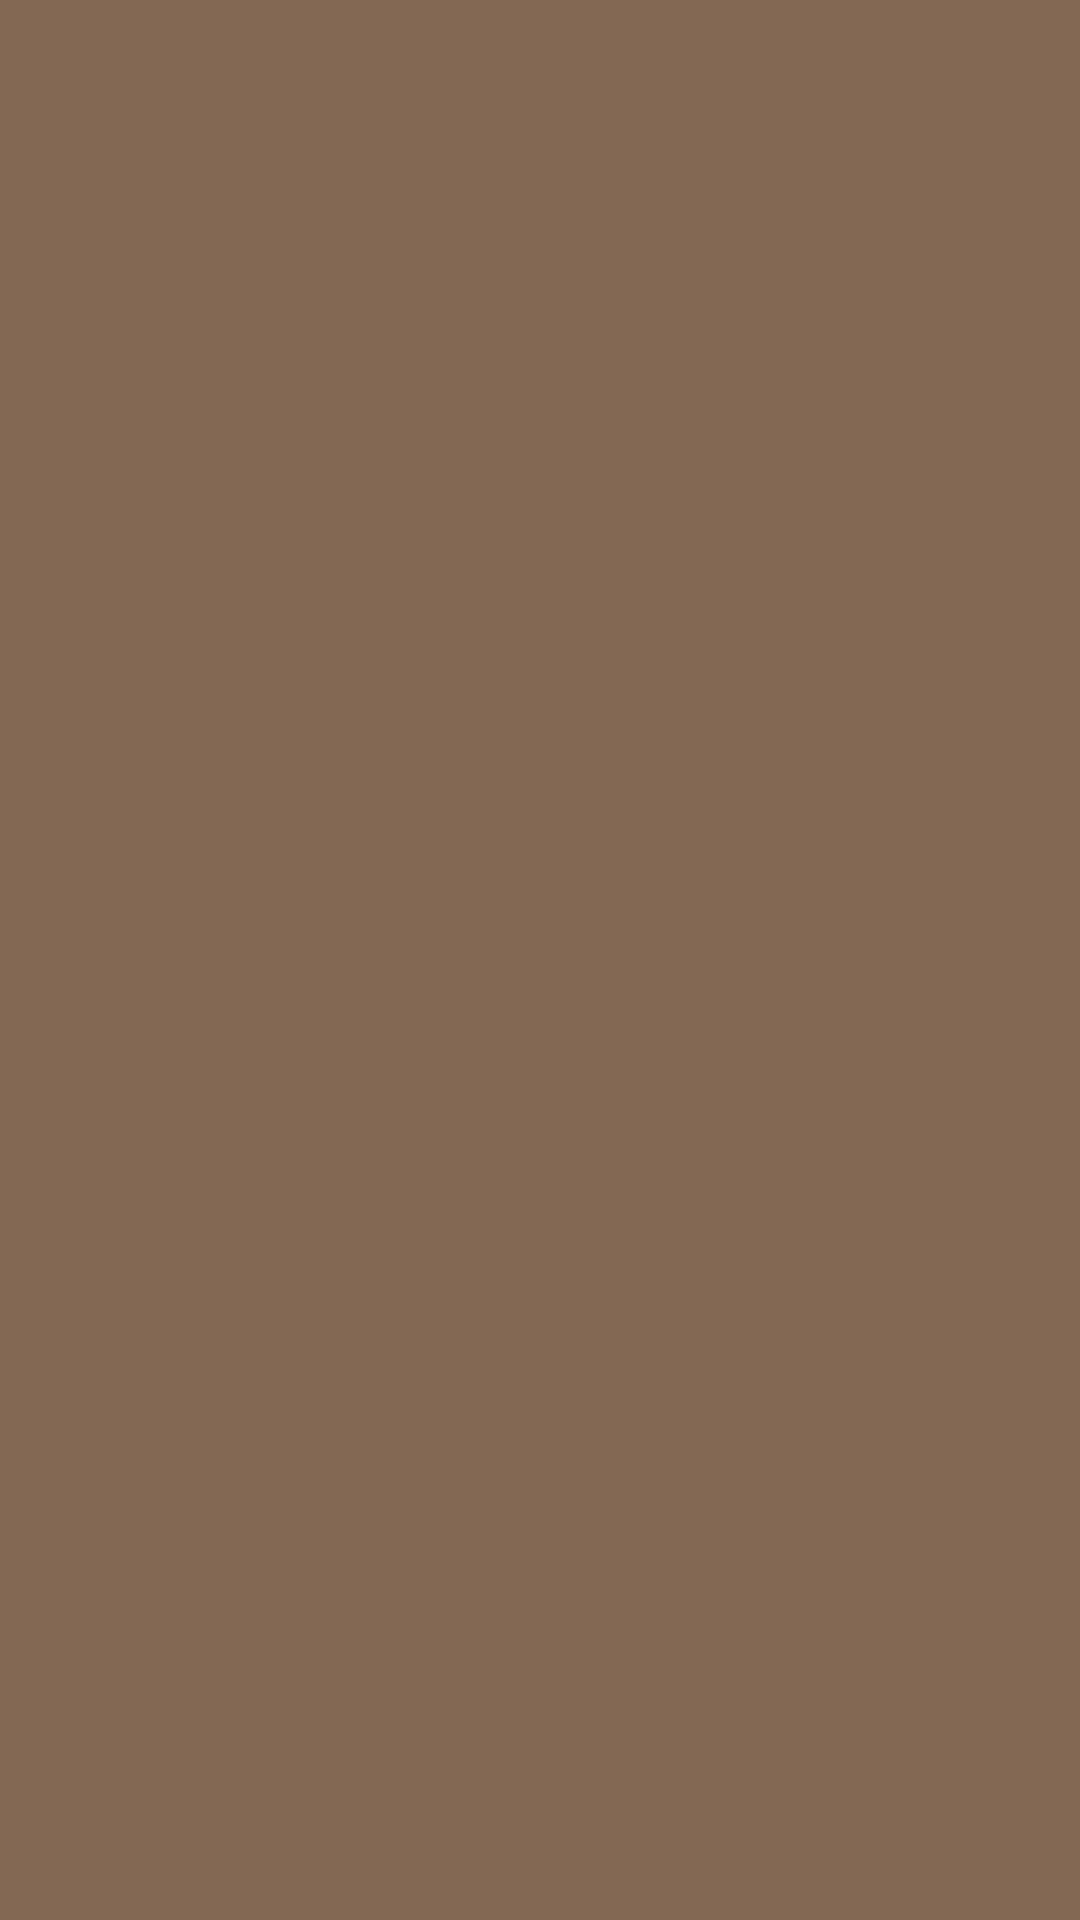 1080x1920 Pastel Brown Solid Color Background